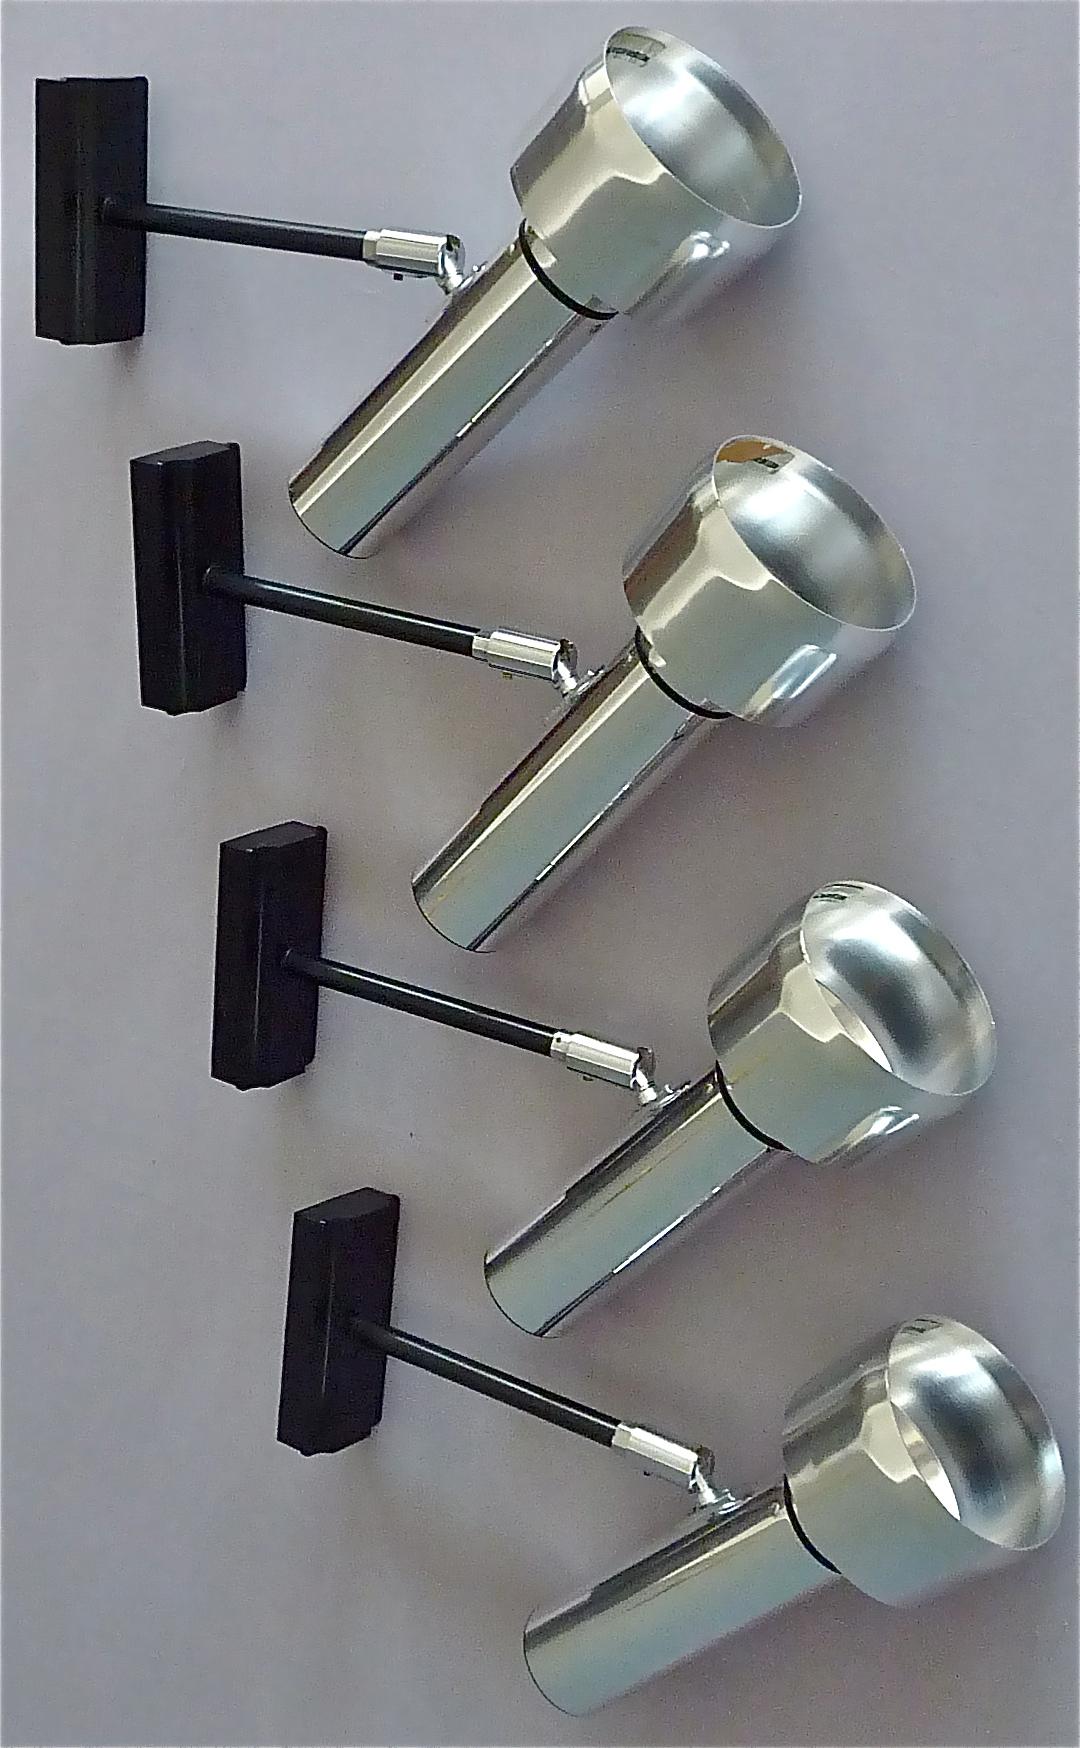 4 Wall Lights Erco Spots Ceiling Lamps Chrome Black Sarfatti Arteluce Style For Sale 3